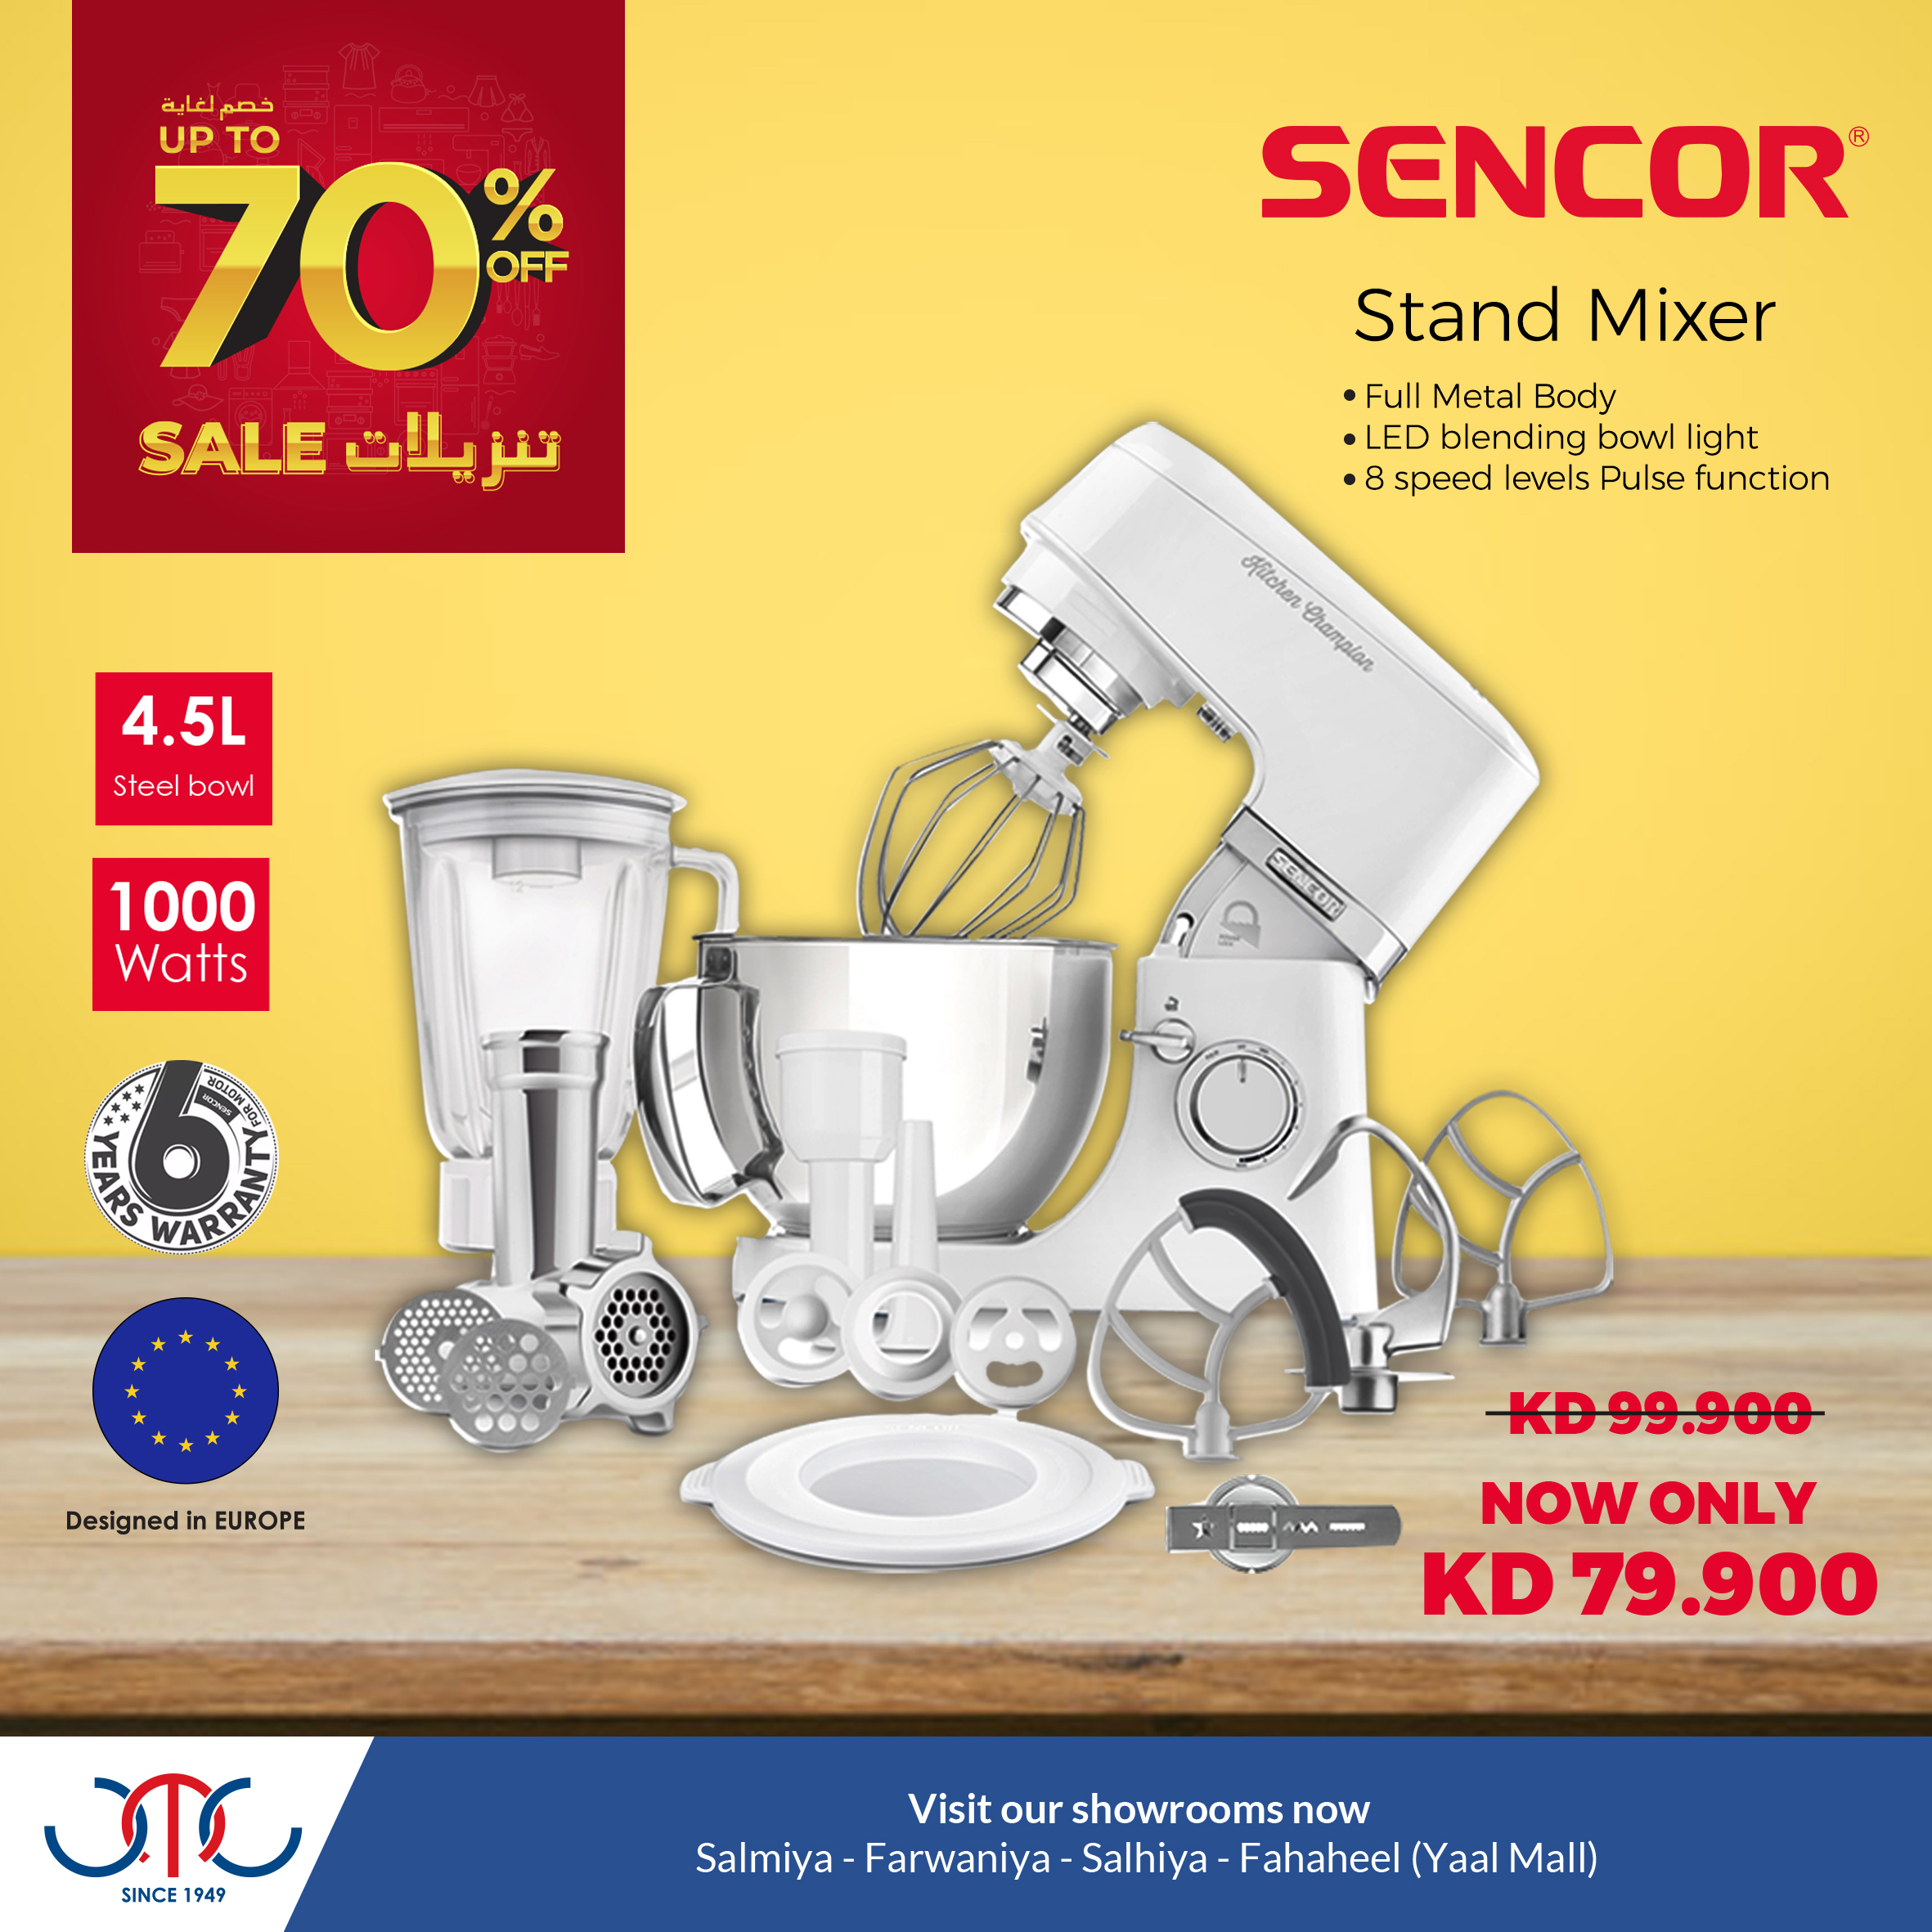 Represent Badly Reorganize UTC Kuwait on Twitter: "Decorate your kitchen with the most durable and  effortless series of Sencor Kitchen Machine. Sencor brings you Stylish,  Feature-rich &amp; Affordable products from from the heart of Central